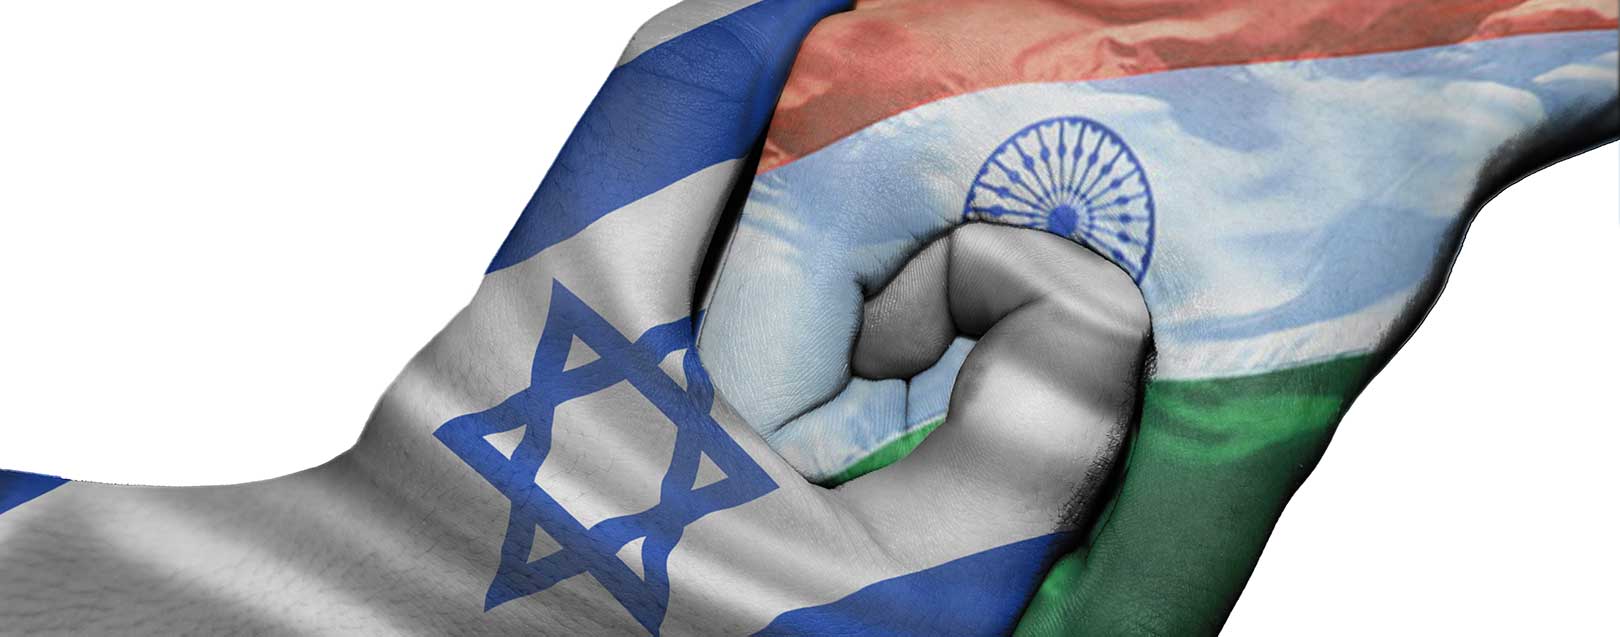 Israel wants more investment friendly policies from Indian government